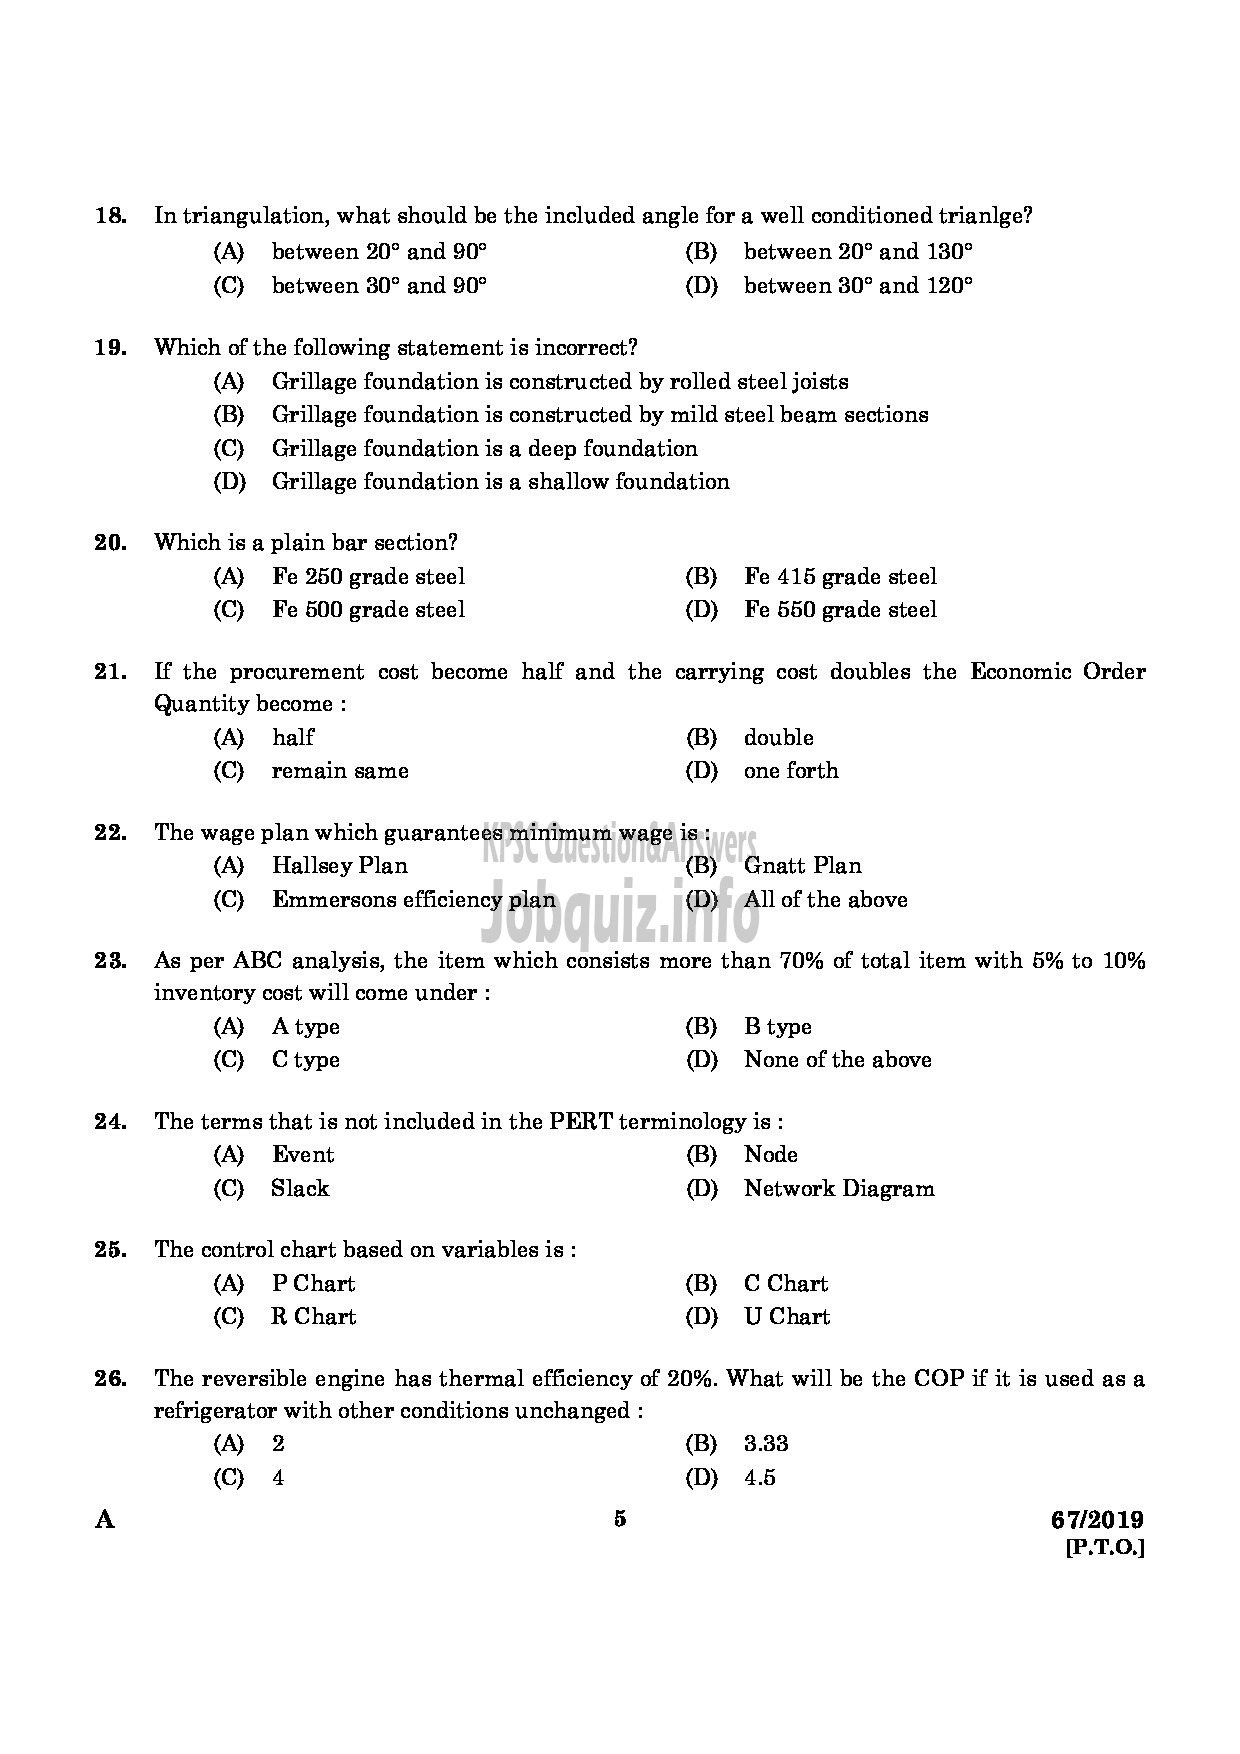 Kerala PSC Question Paper - Industries Extension Officer Industries And Commerce English -3